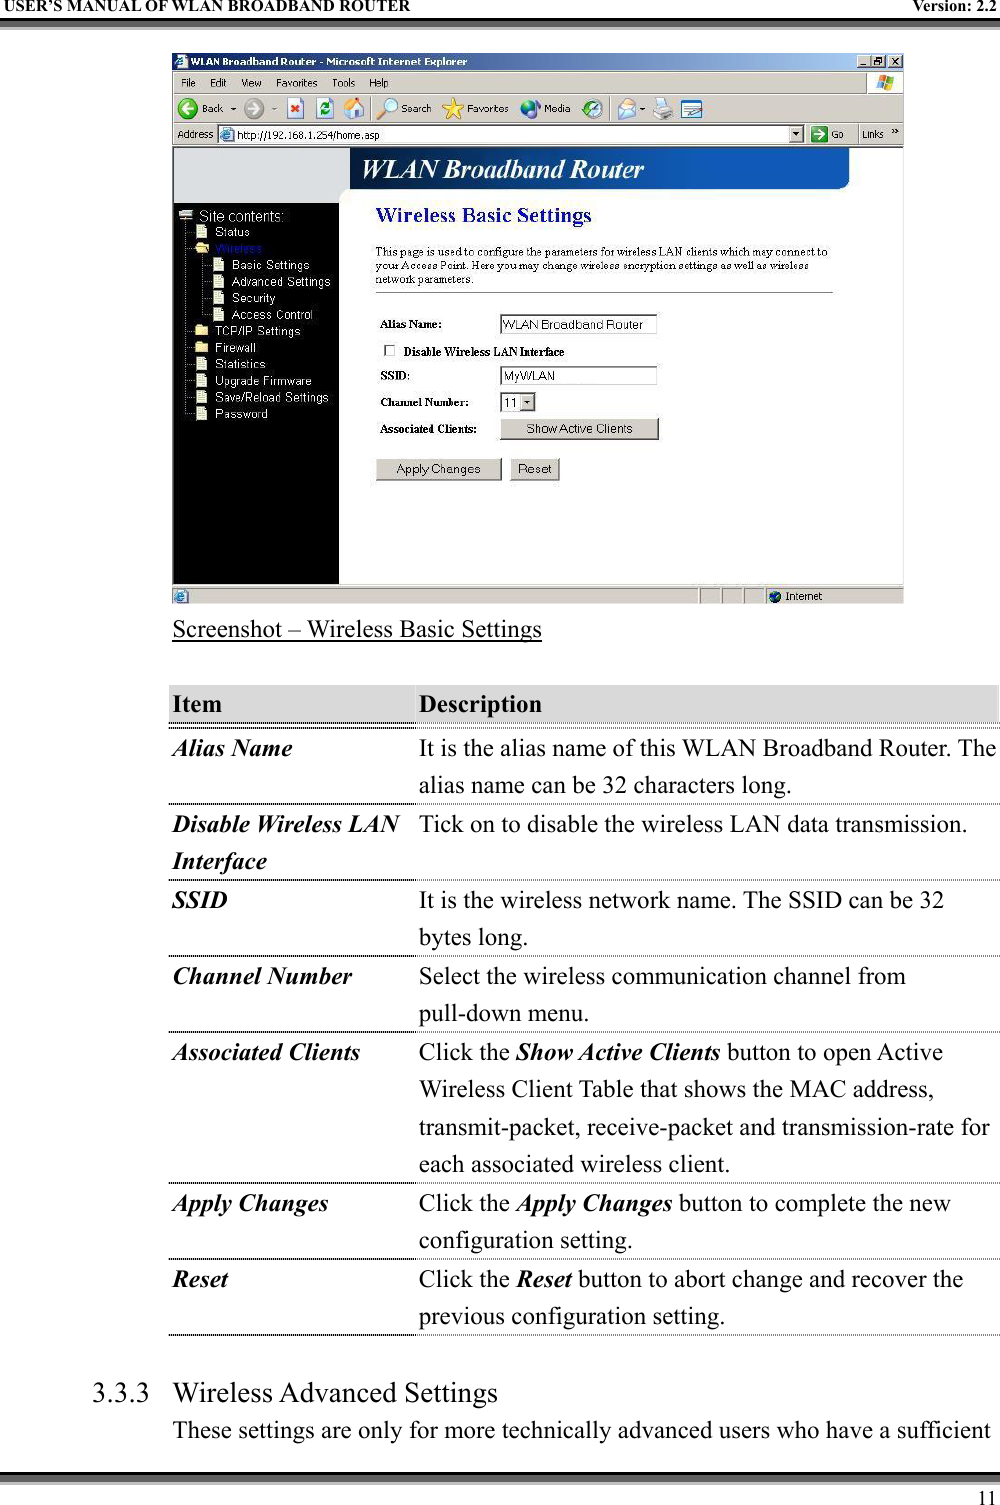   USER’S MANUAL OF WLAN BROADBAND ROUTER    Version: 2.2     11  Screenshot – Wireless Basic Settings  Item  Description   Alias Name It is the alias name of this WLAN Broadband Router. The alias name can be 32 characters long. Disable Wireless LAN Interface Tick on to disable the wireless LAN data transmission. SSID It is the wireless network name. The SSID can be 32 bytes long. Channel Number Select the wireless communication channel from pull-down menu. Associated Clients Click the Show Active Clients button to open Active Wireless Client Table that shows the MAC address, transmit-packet, receive-packet and transmission-rate for each associated wireless client. Apply Changes Click the Apply Changes button to complete the new configuration setting. Reset  Click the Reset button to abort change and recover the previous configuration setting.  3.3.3 Wireless Advanced Settings These settings are only for more technically advanced users who have a sufficient 